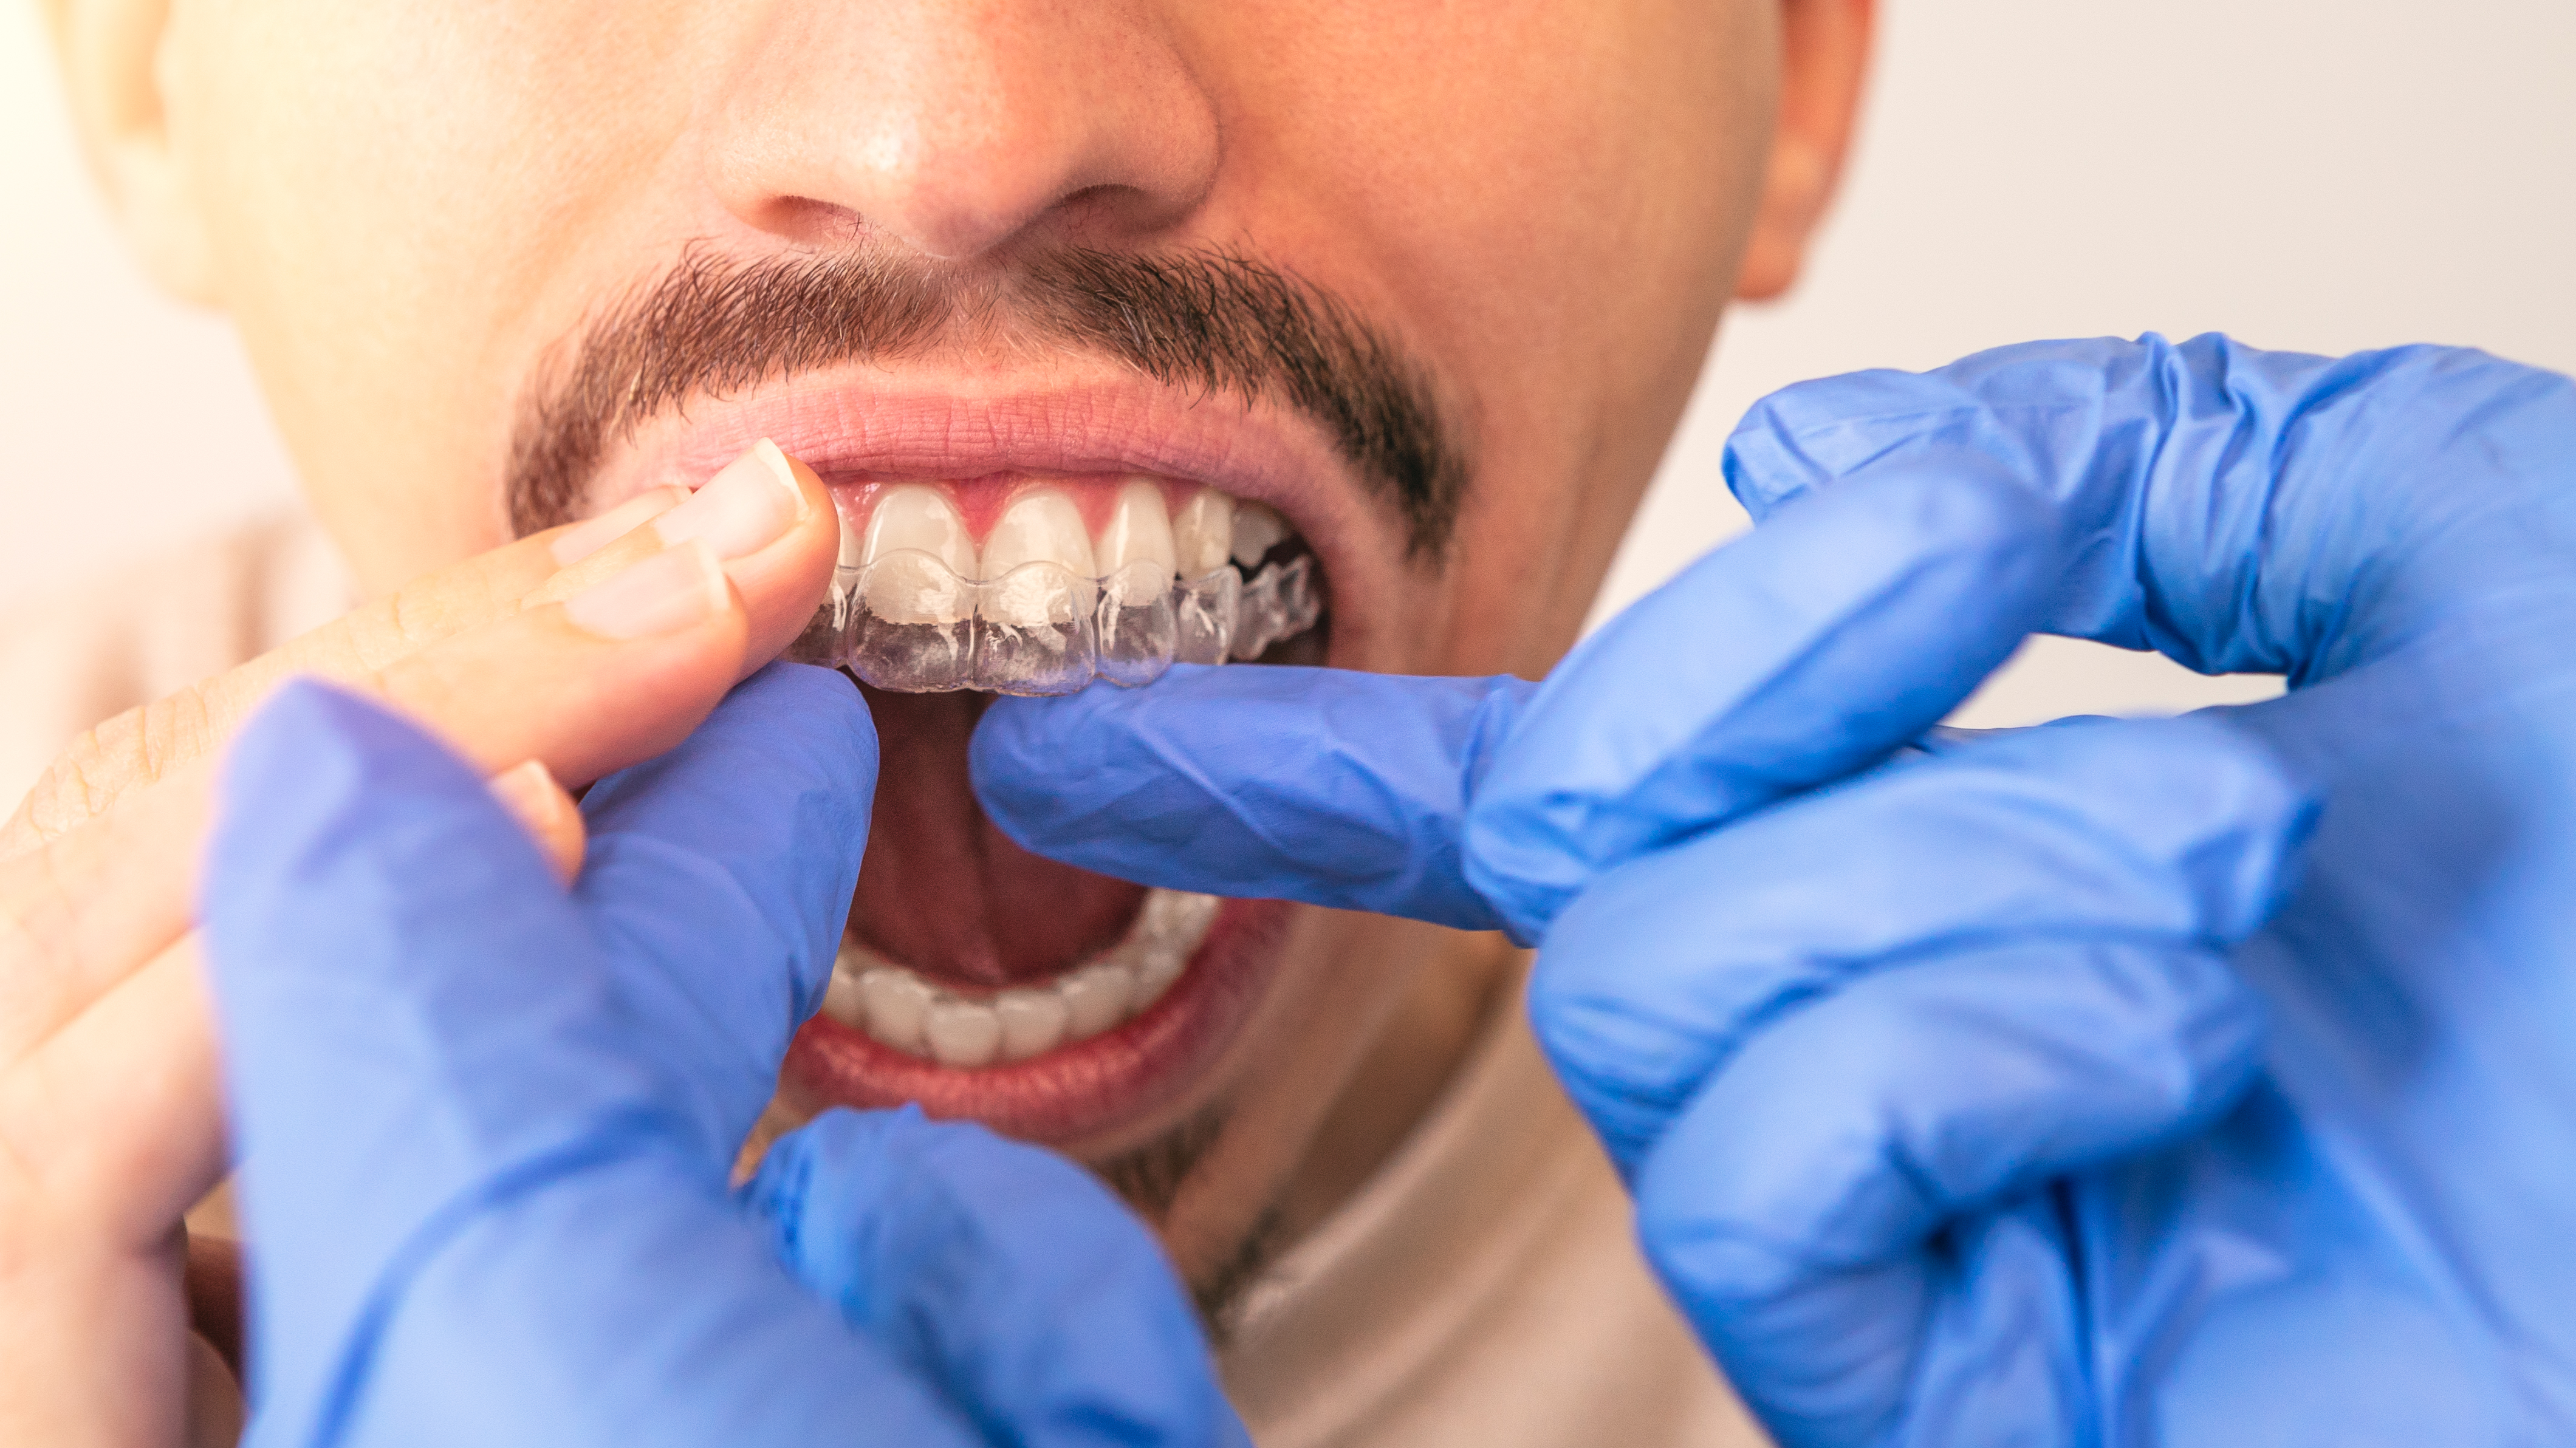 Orthodontist doctor putting silicone invisible transparent braces on man's teeth